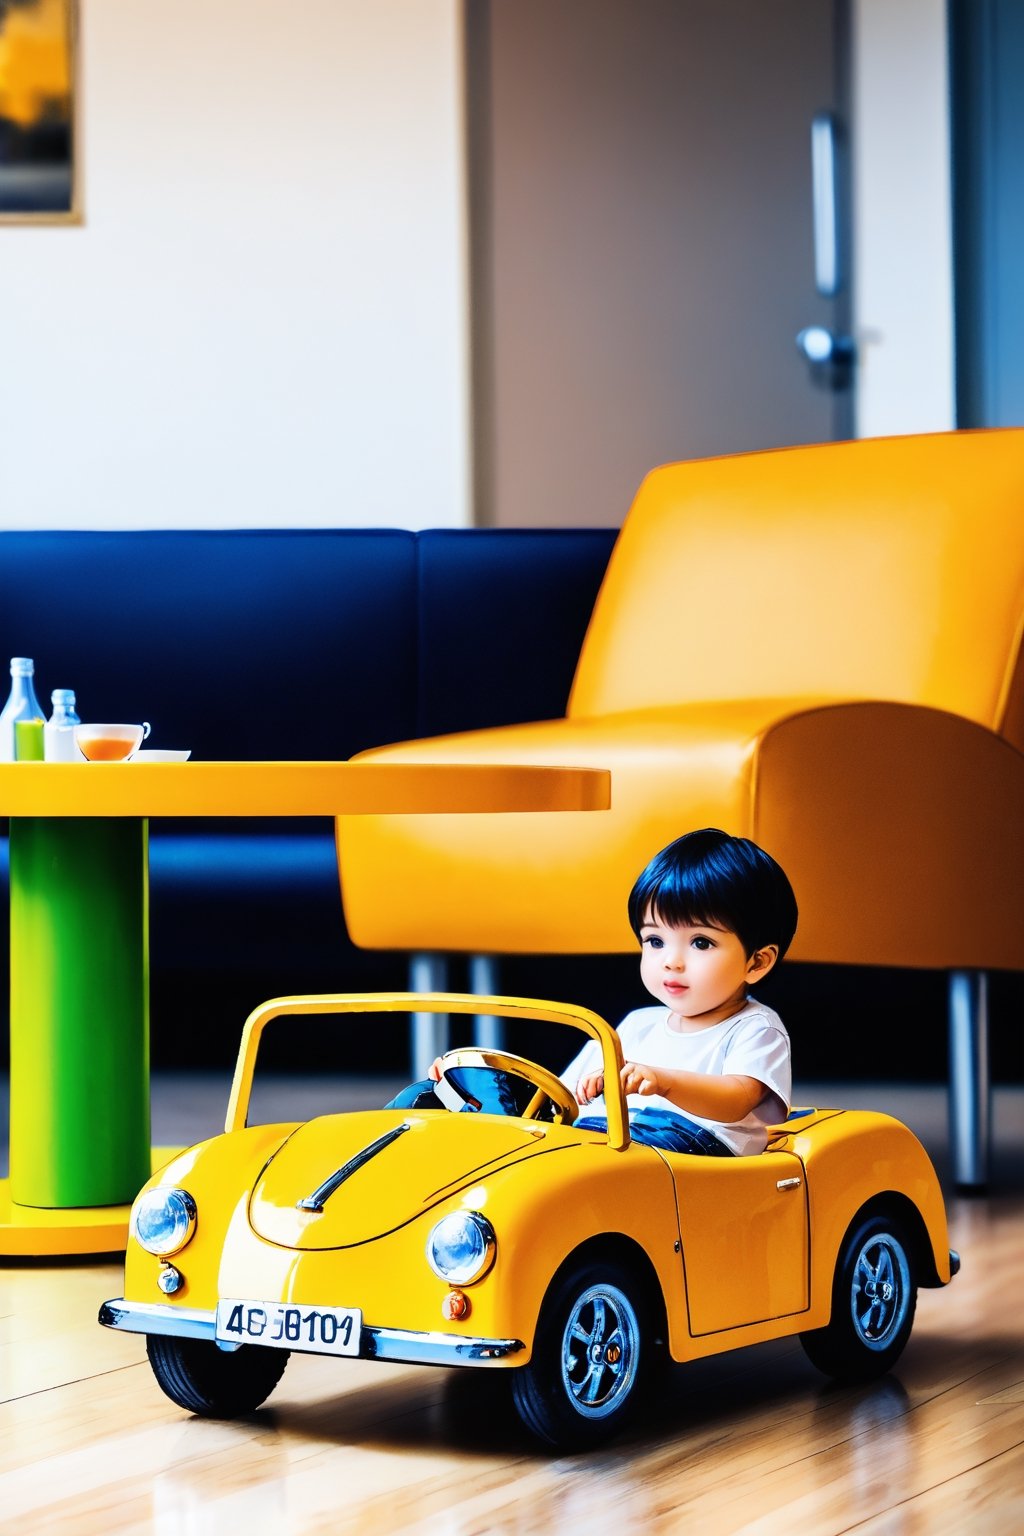 The image features a young boy sitting on a toy car, which appears to be a walker or a toy car with wheels. The boy is wearing a white shirt and seems to be enjoying his time on the toy car. 

In the background, there is a dining table with a few items on it, including a bottle, a cup, and a bowl. A dog is also present in the scene, standing near the boy and the toy car, possibly watching the child play.